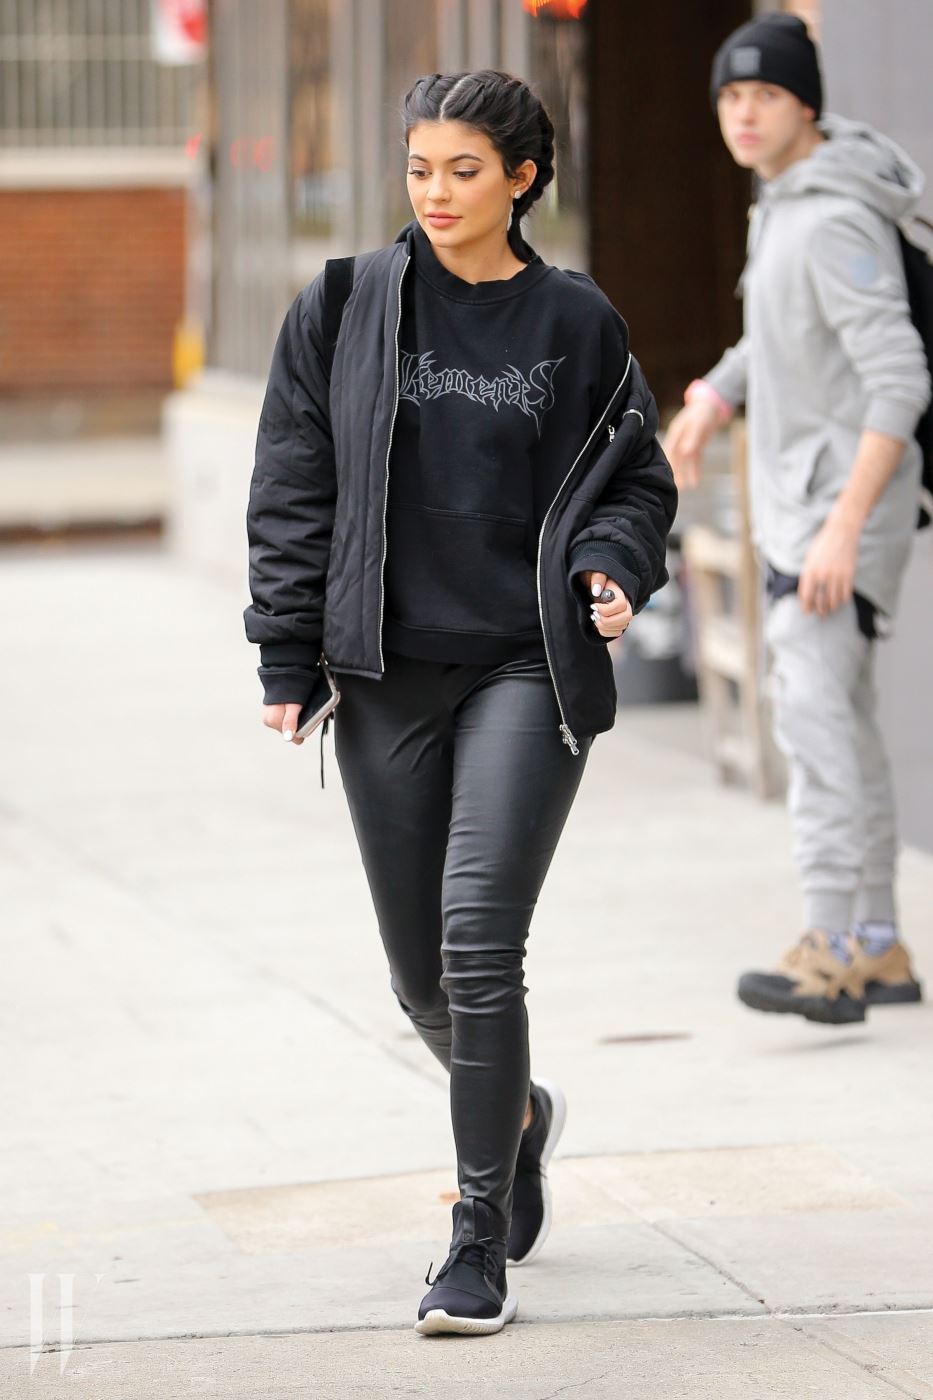 Kylie Jenner spotted wearing adidas sneakers while heads out in New York City Pictured: Kylie Jenner Ref: SPL1230600  170216   Picture by: Felipe Ramales / Splash News Splash News and Pictures Los Angeles:310-821-2666 New York:	212-619-2666 London:	870-934-2666 photodesk@splashnews.com 